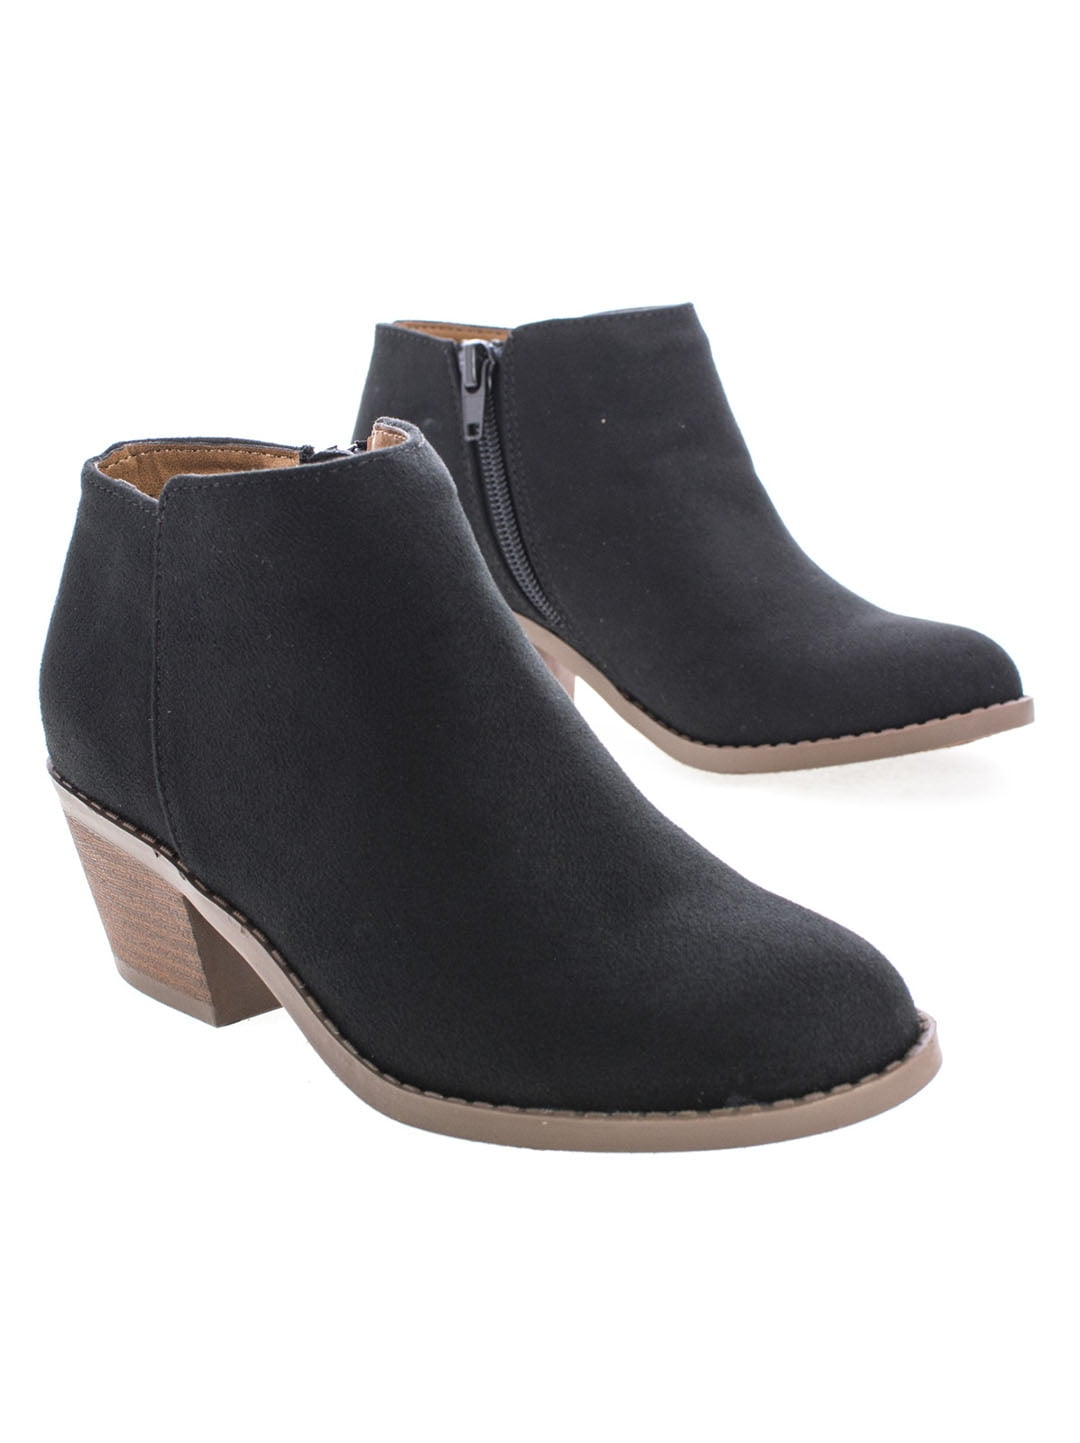 simple ankle boots